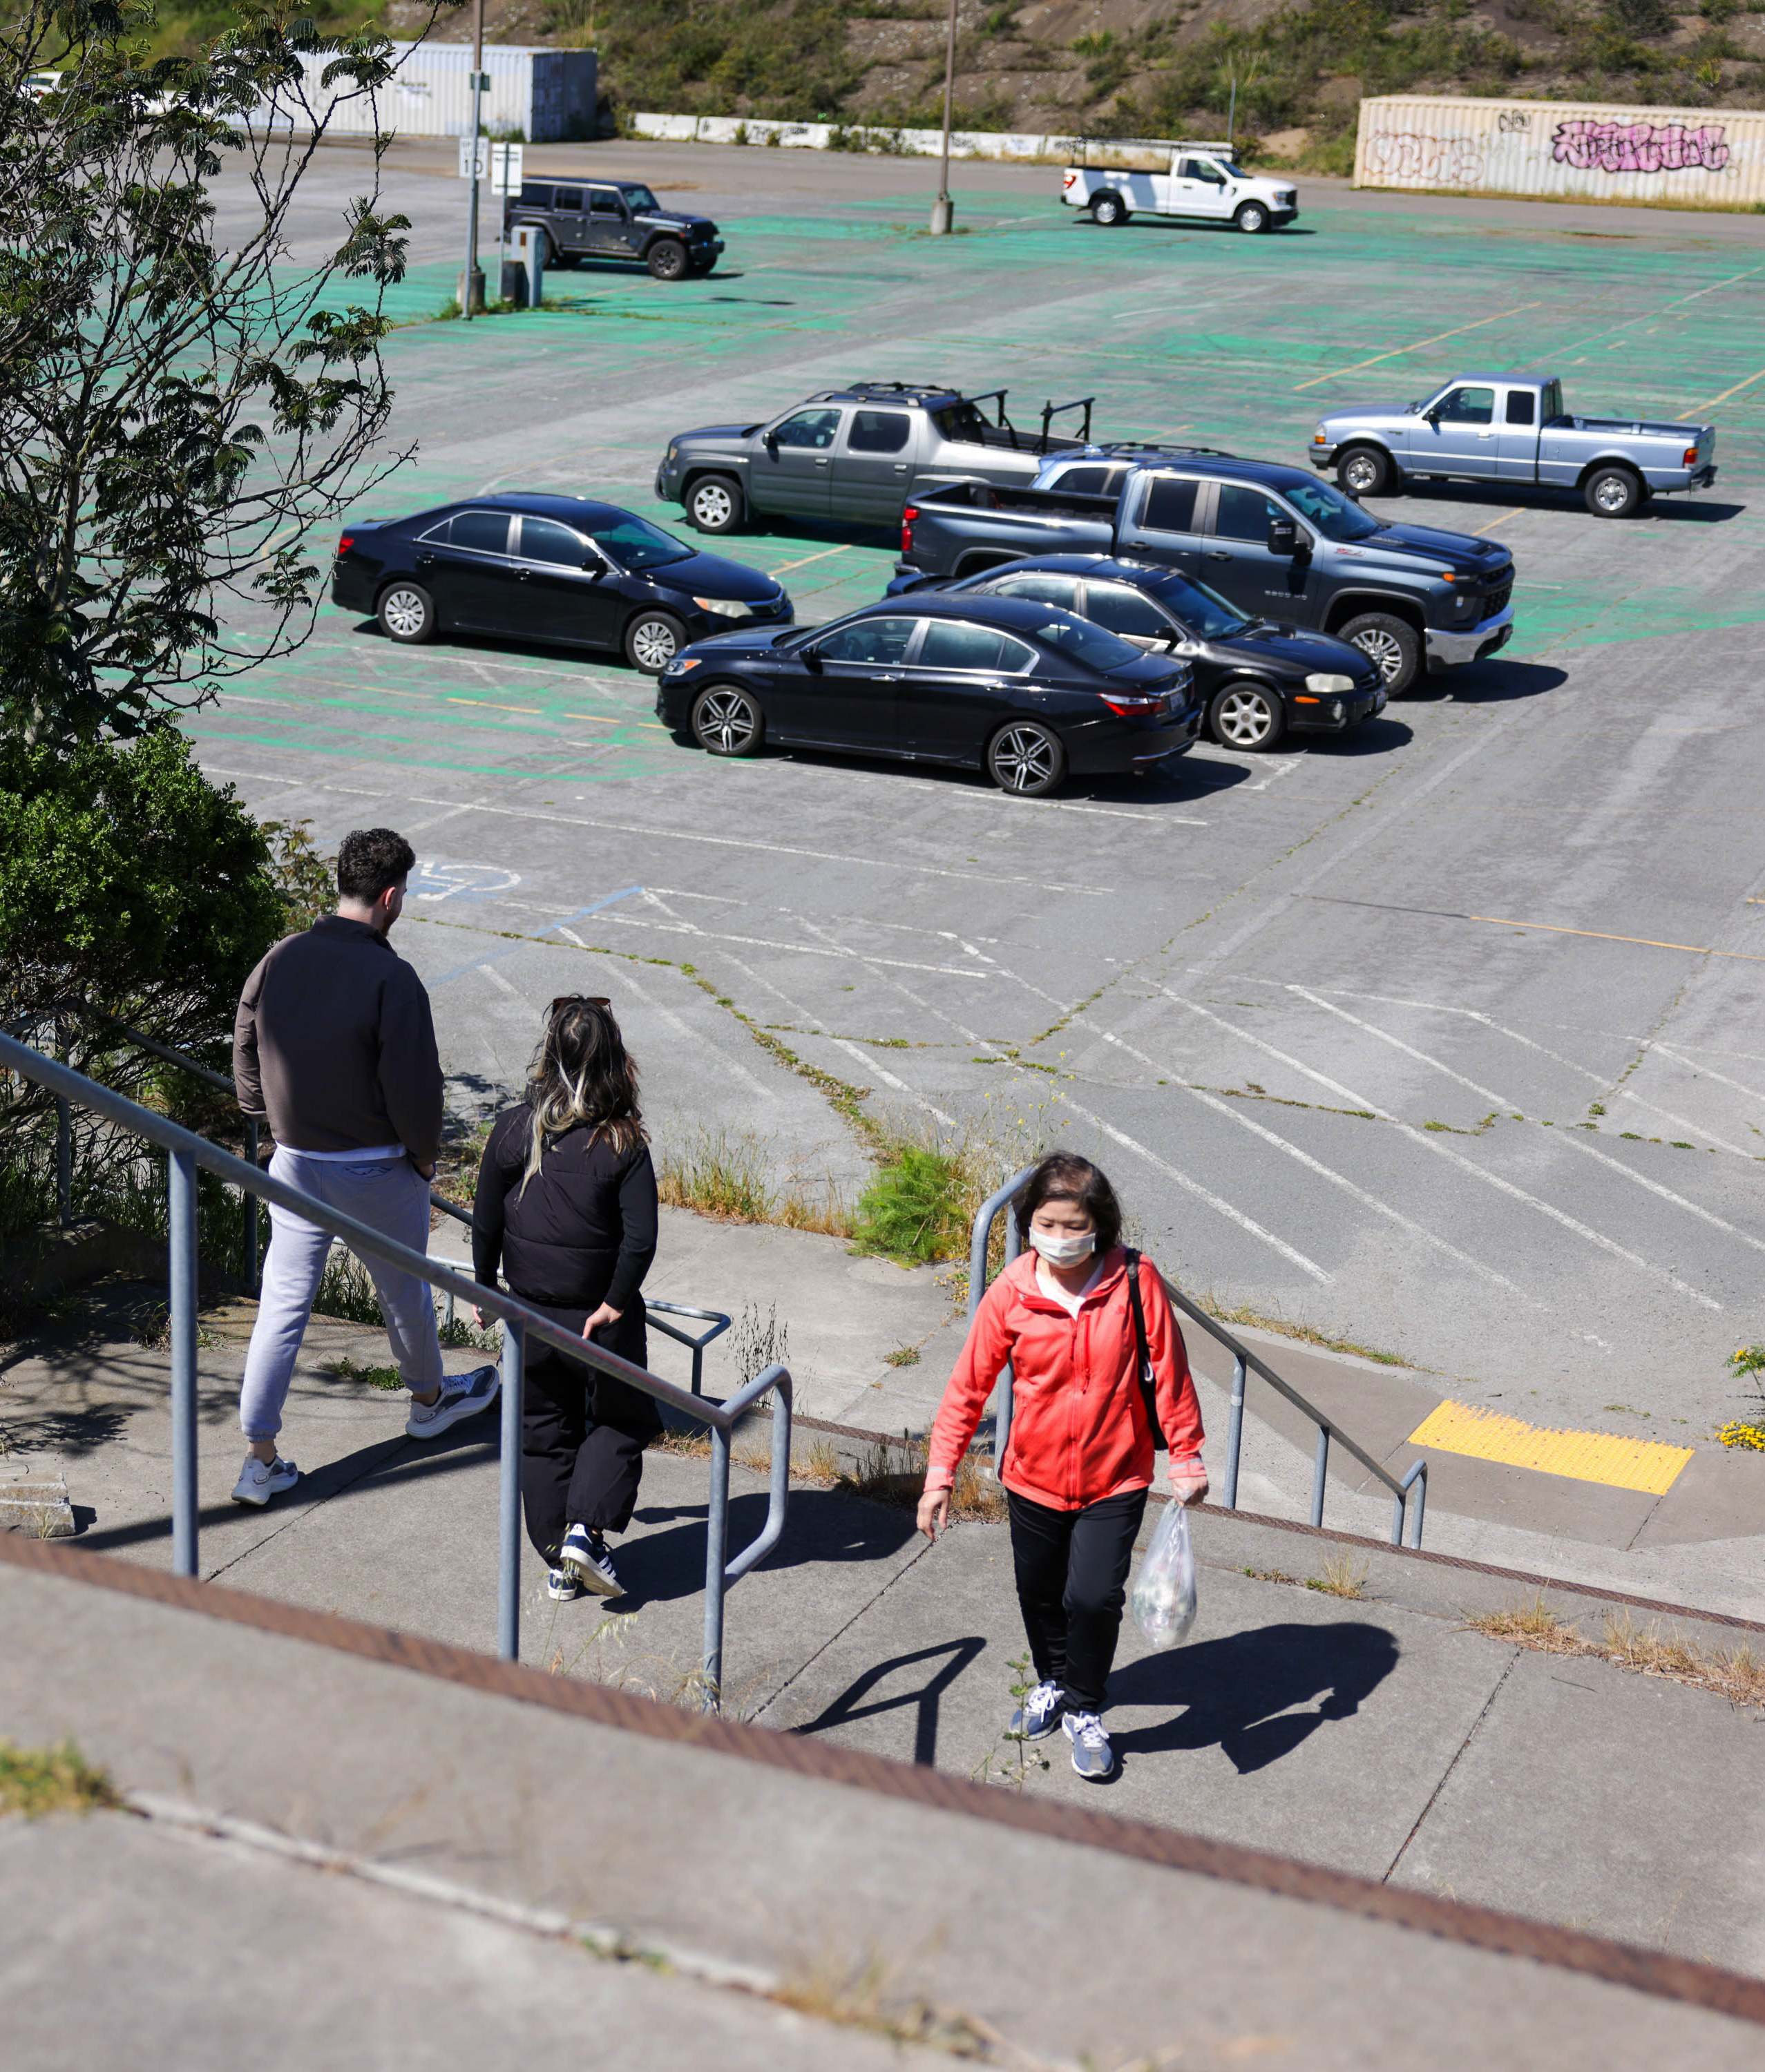 Three people are walking up concrete steps beside a parking lot with several cars.